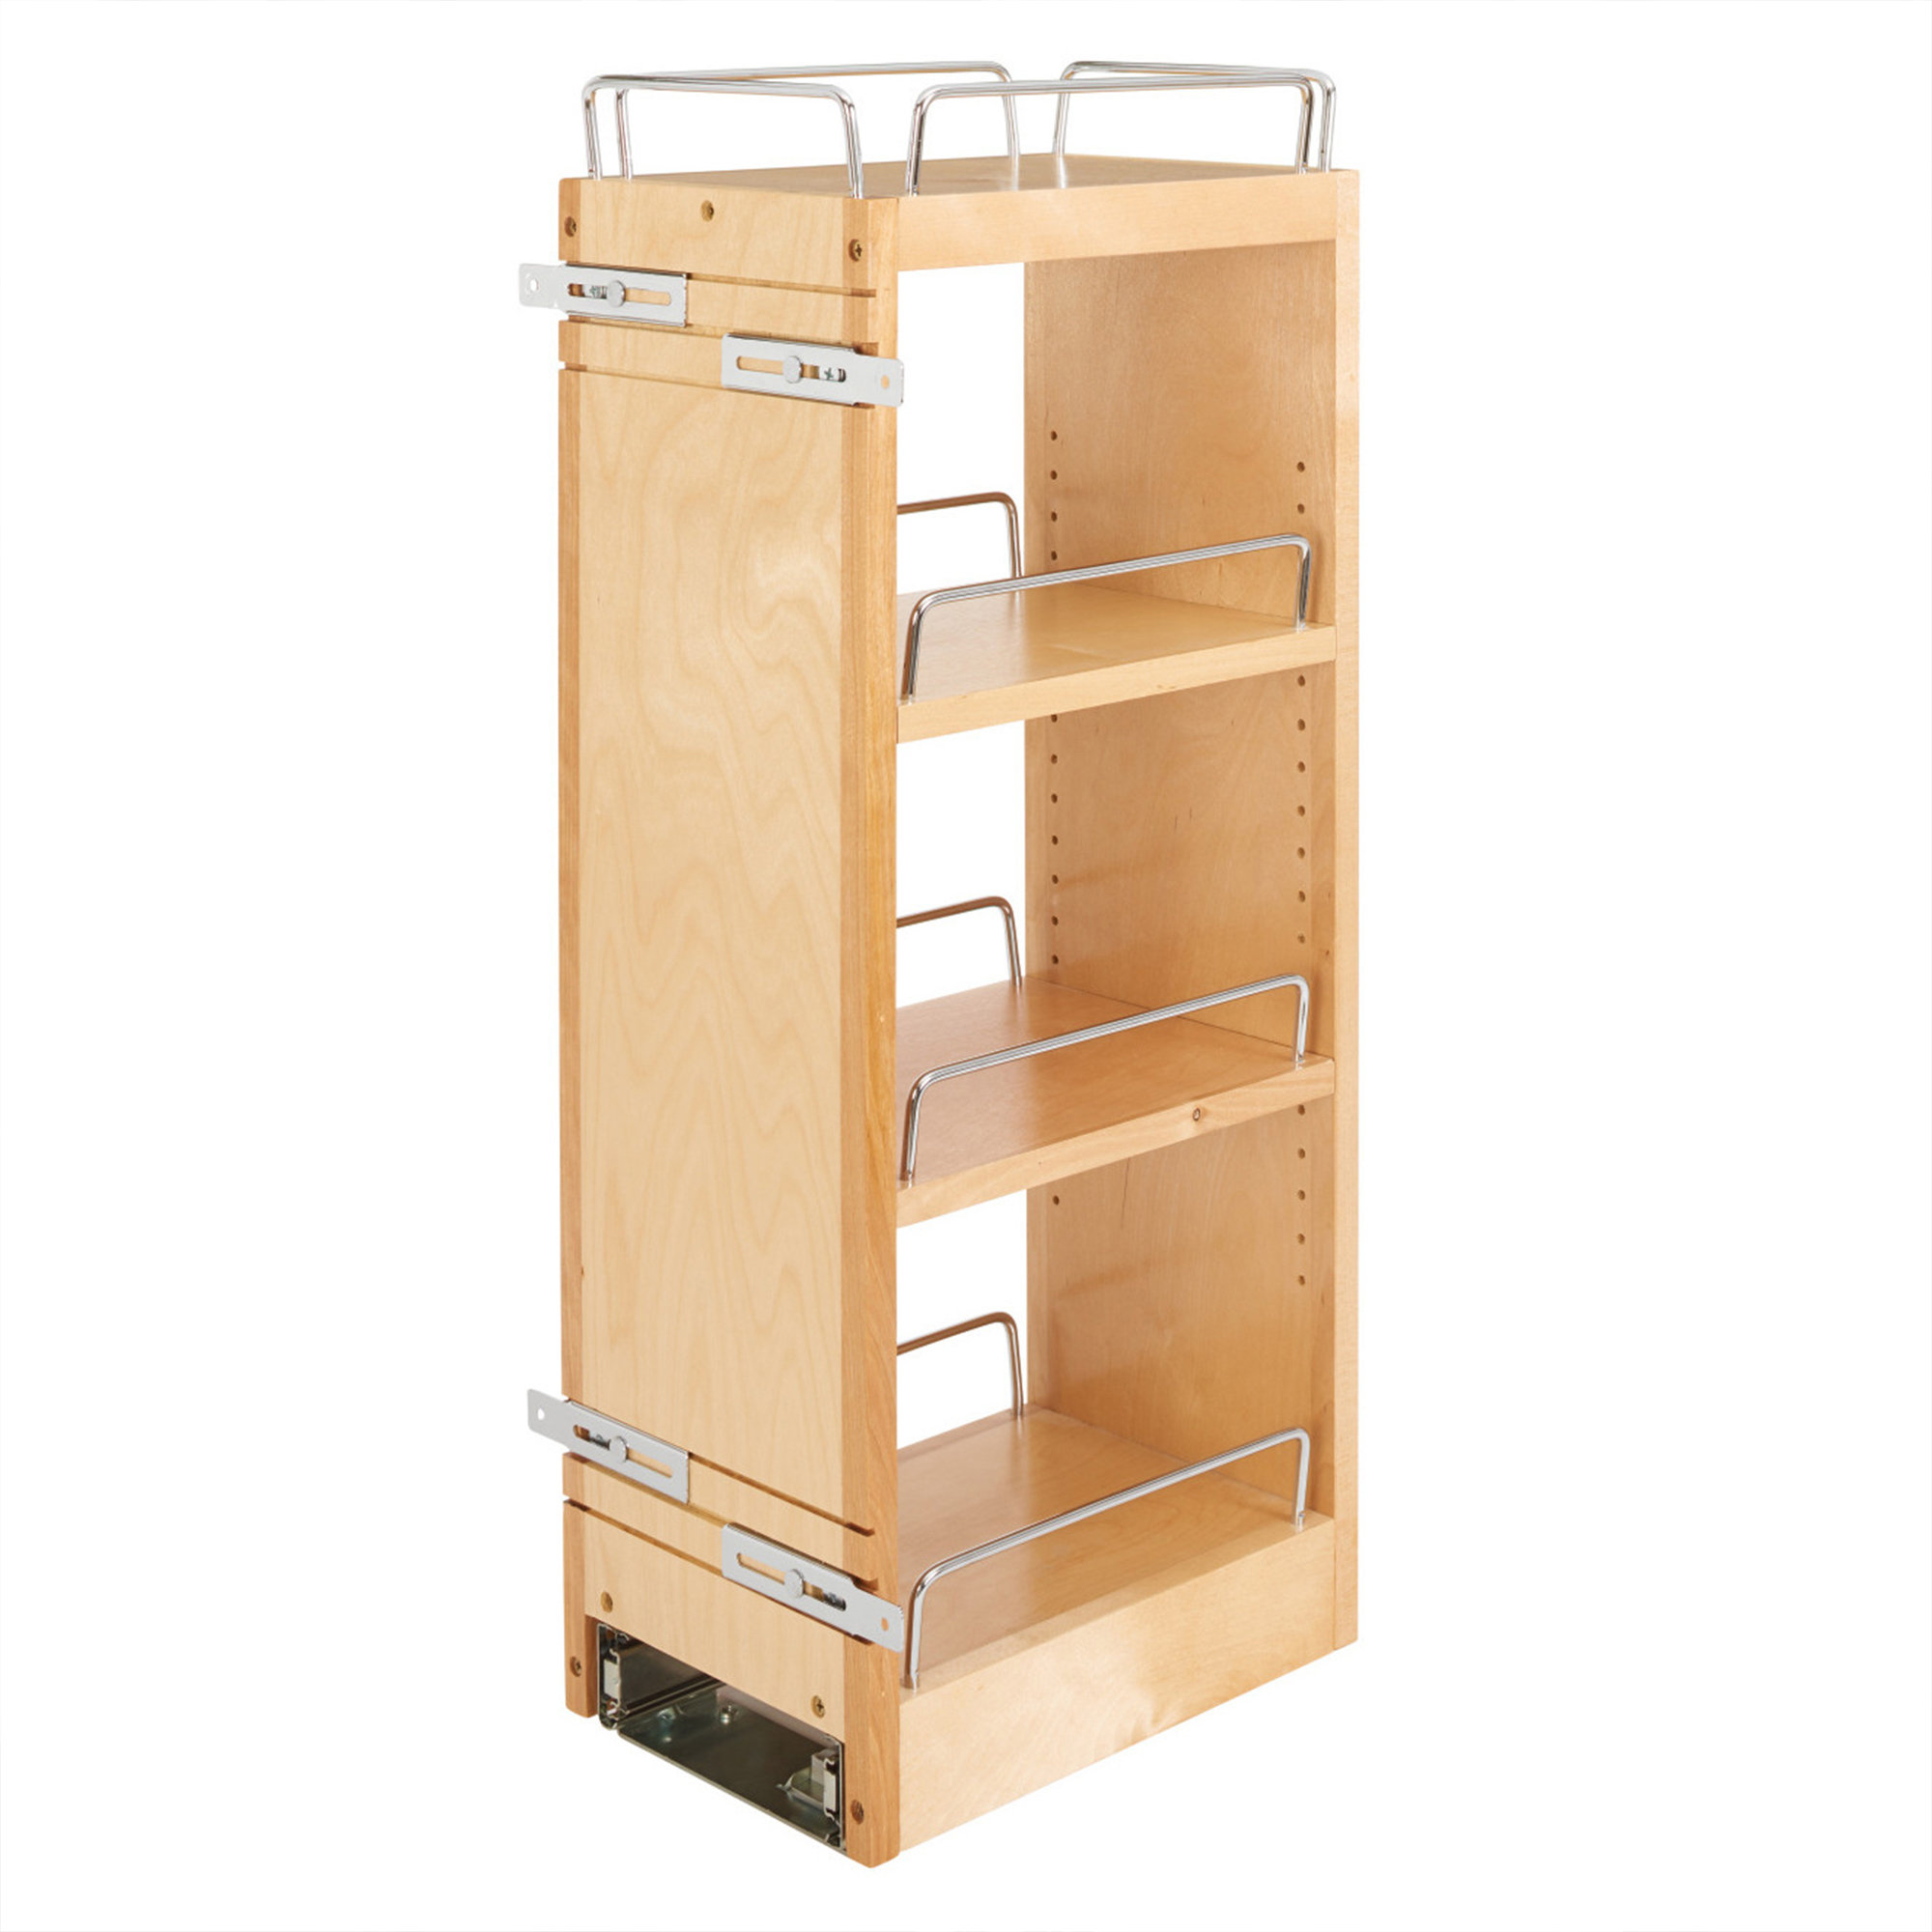 Rev-A-Shelf 448-Wc-5C Pull-Out Wood Wall Cabinet Organizer, Natural